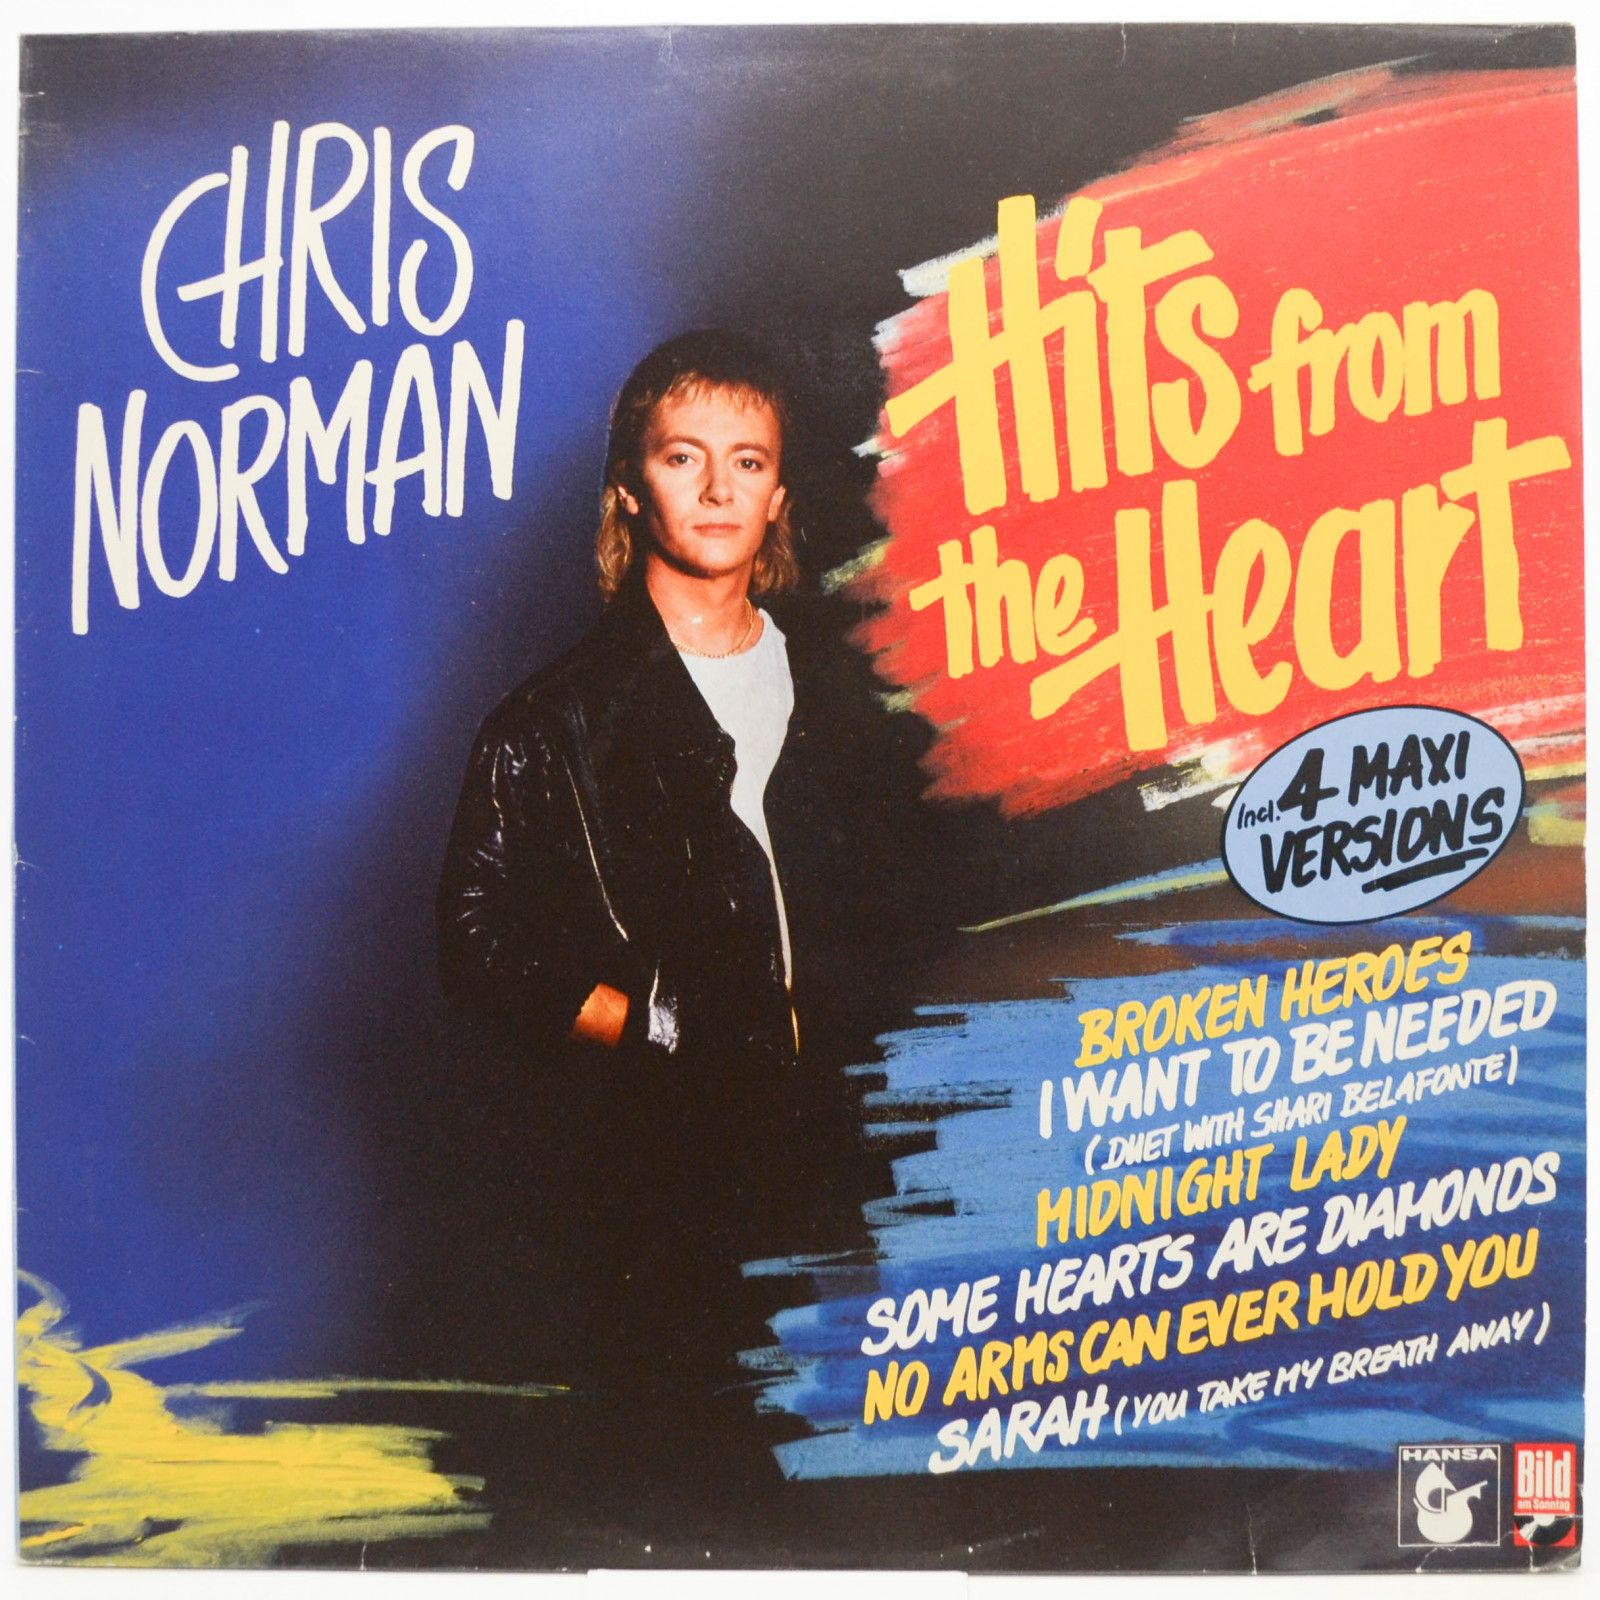 Chris Norman — Hits From The Heart, 1988